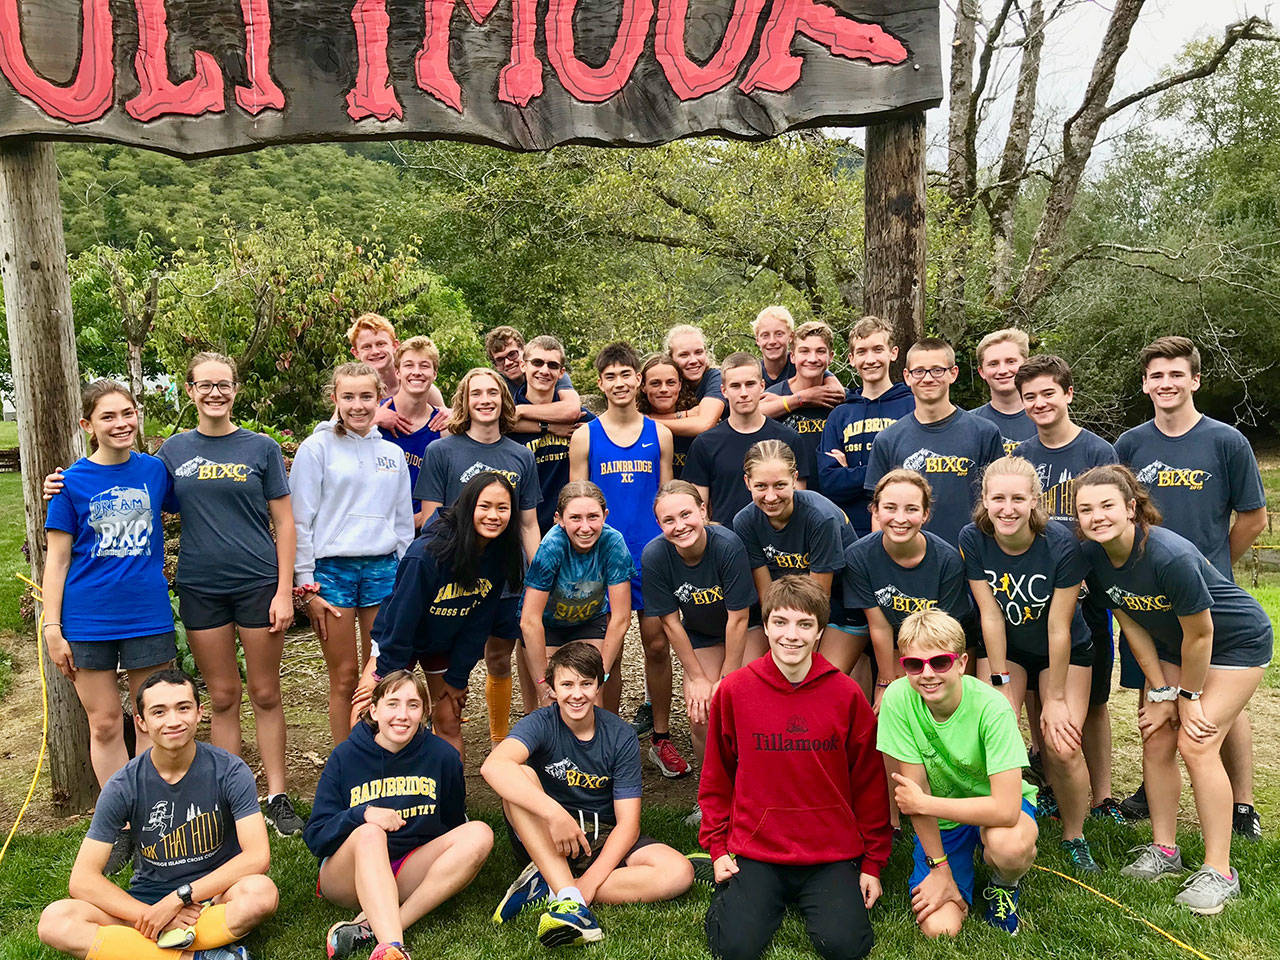 Photo courtesy of Anne Howard Lindquist | Thirty-one members of Bainbridge High School cross country team trekked to Tillamook, Oregon to compete in the Ultimook 5K last weekend.